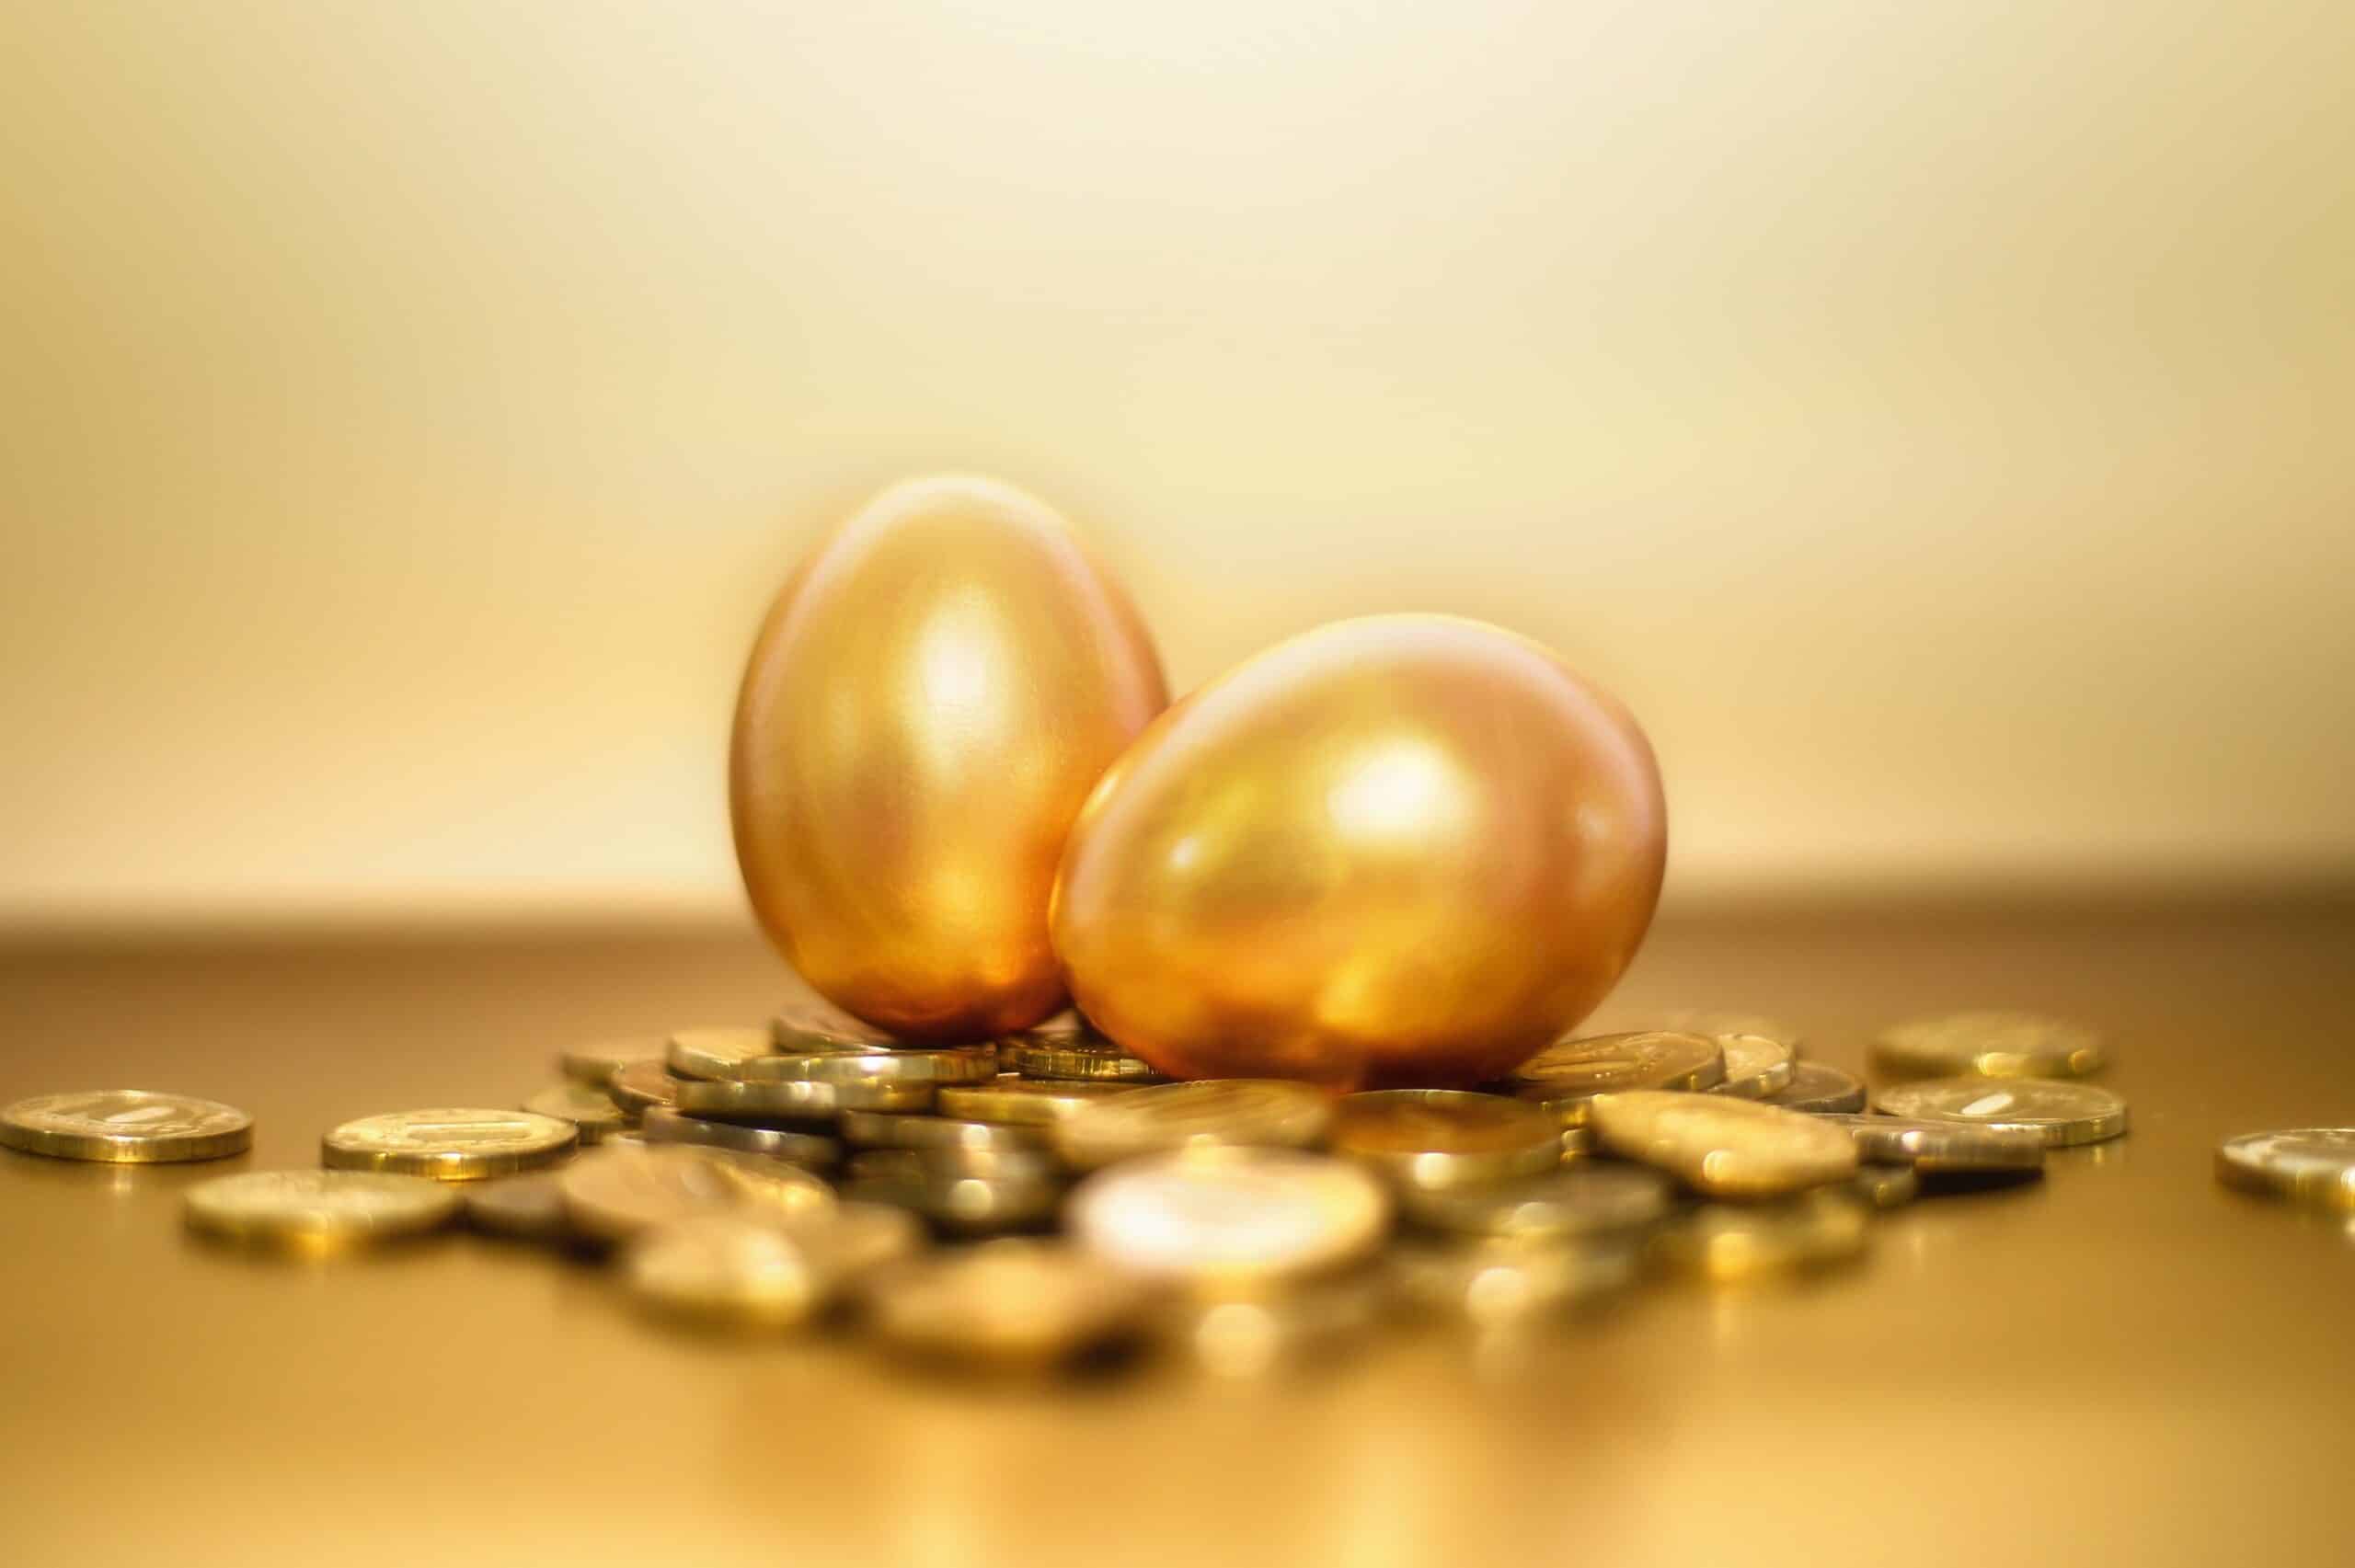 image of golden eggs in a nest, symbolic of a financial nest egg. Related to our topic of separation, divorce and superannuation splitting in financial settlements.